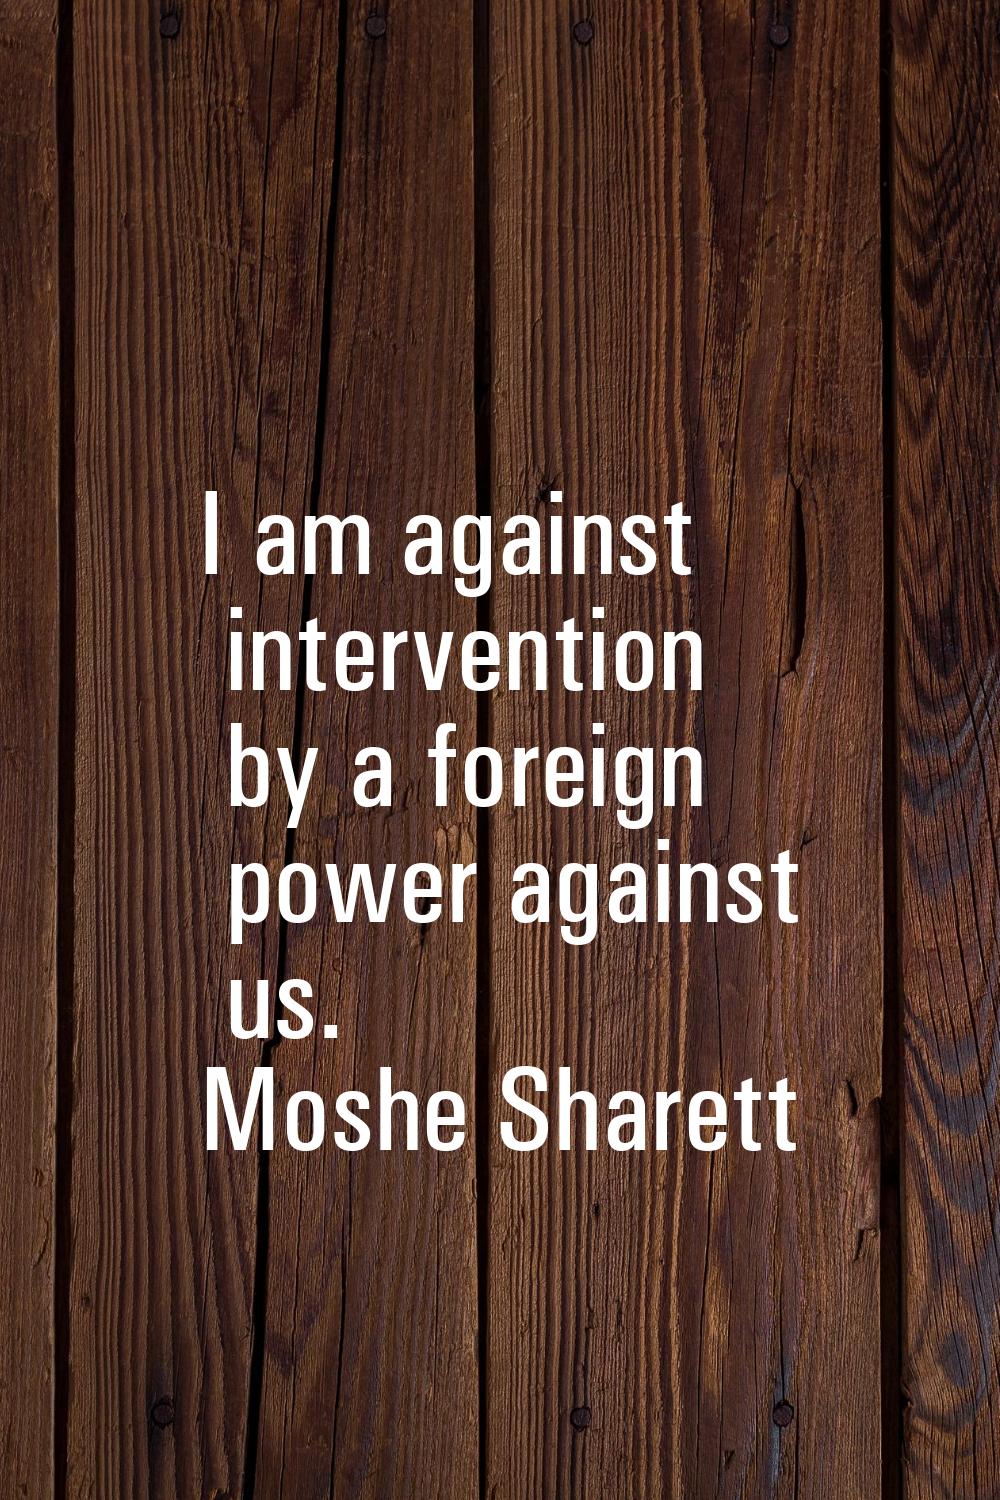 I am against intervention by a foreign power against us.